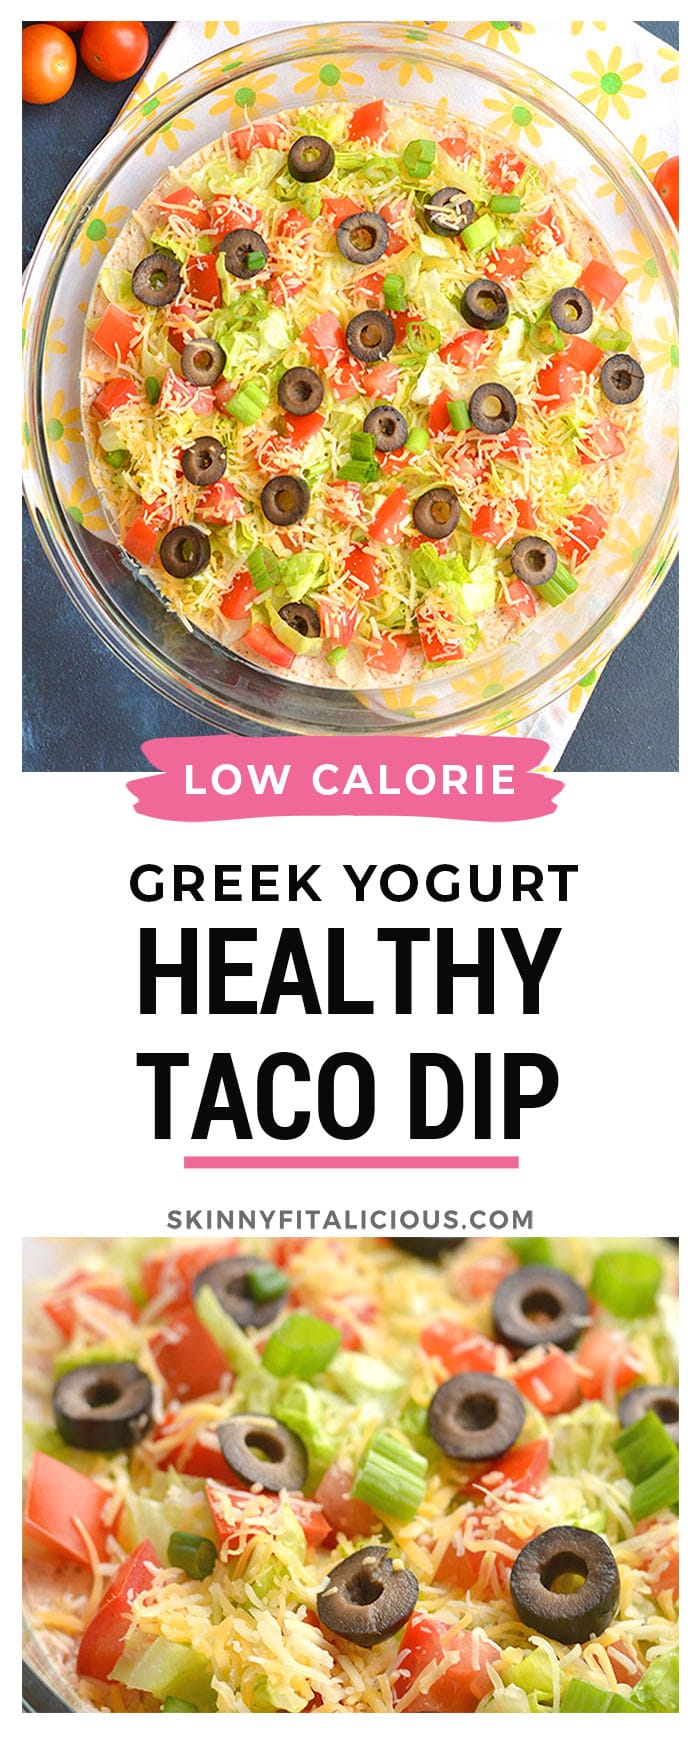 Healthy Taco Dip made with tangy, protein packed Greek Yogurt and homemade taco seasoning! Your guests will have no idea this flavorful party dip is healthy!